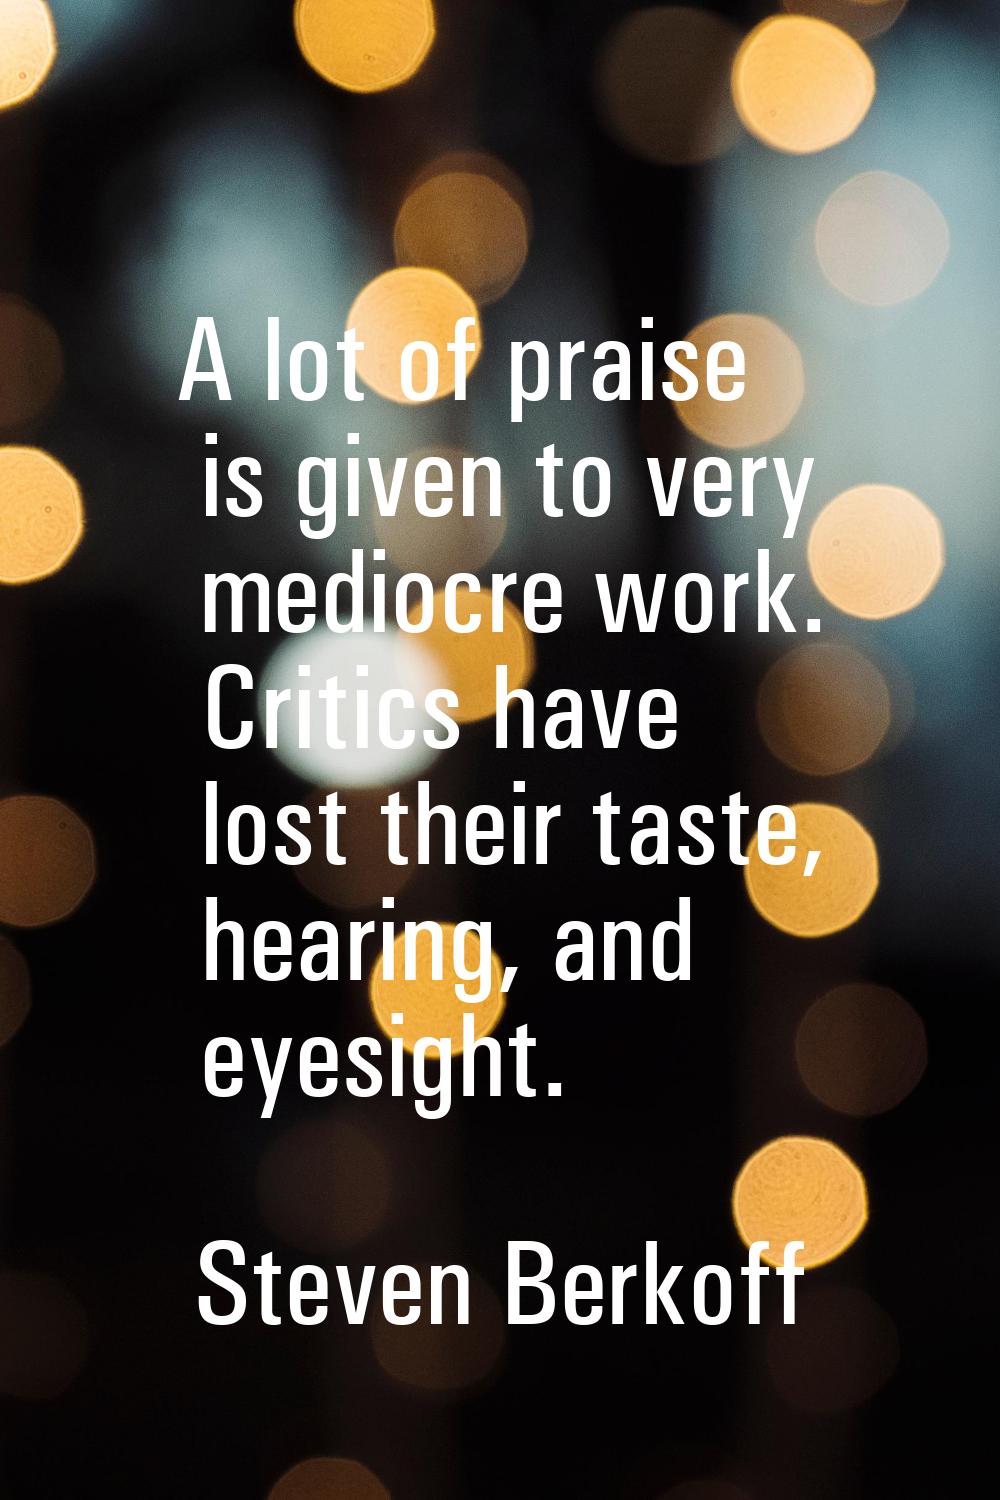 A lot of praise is given to very mediocre work. Critics have lost their taste, hearing, and eyesigh